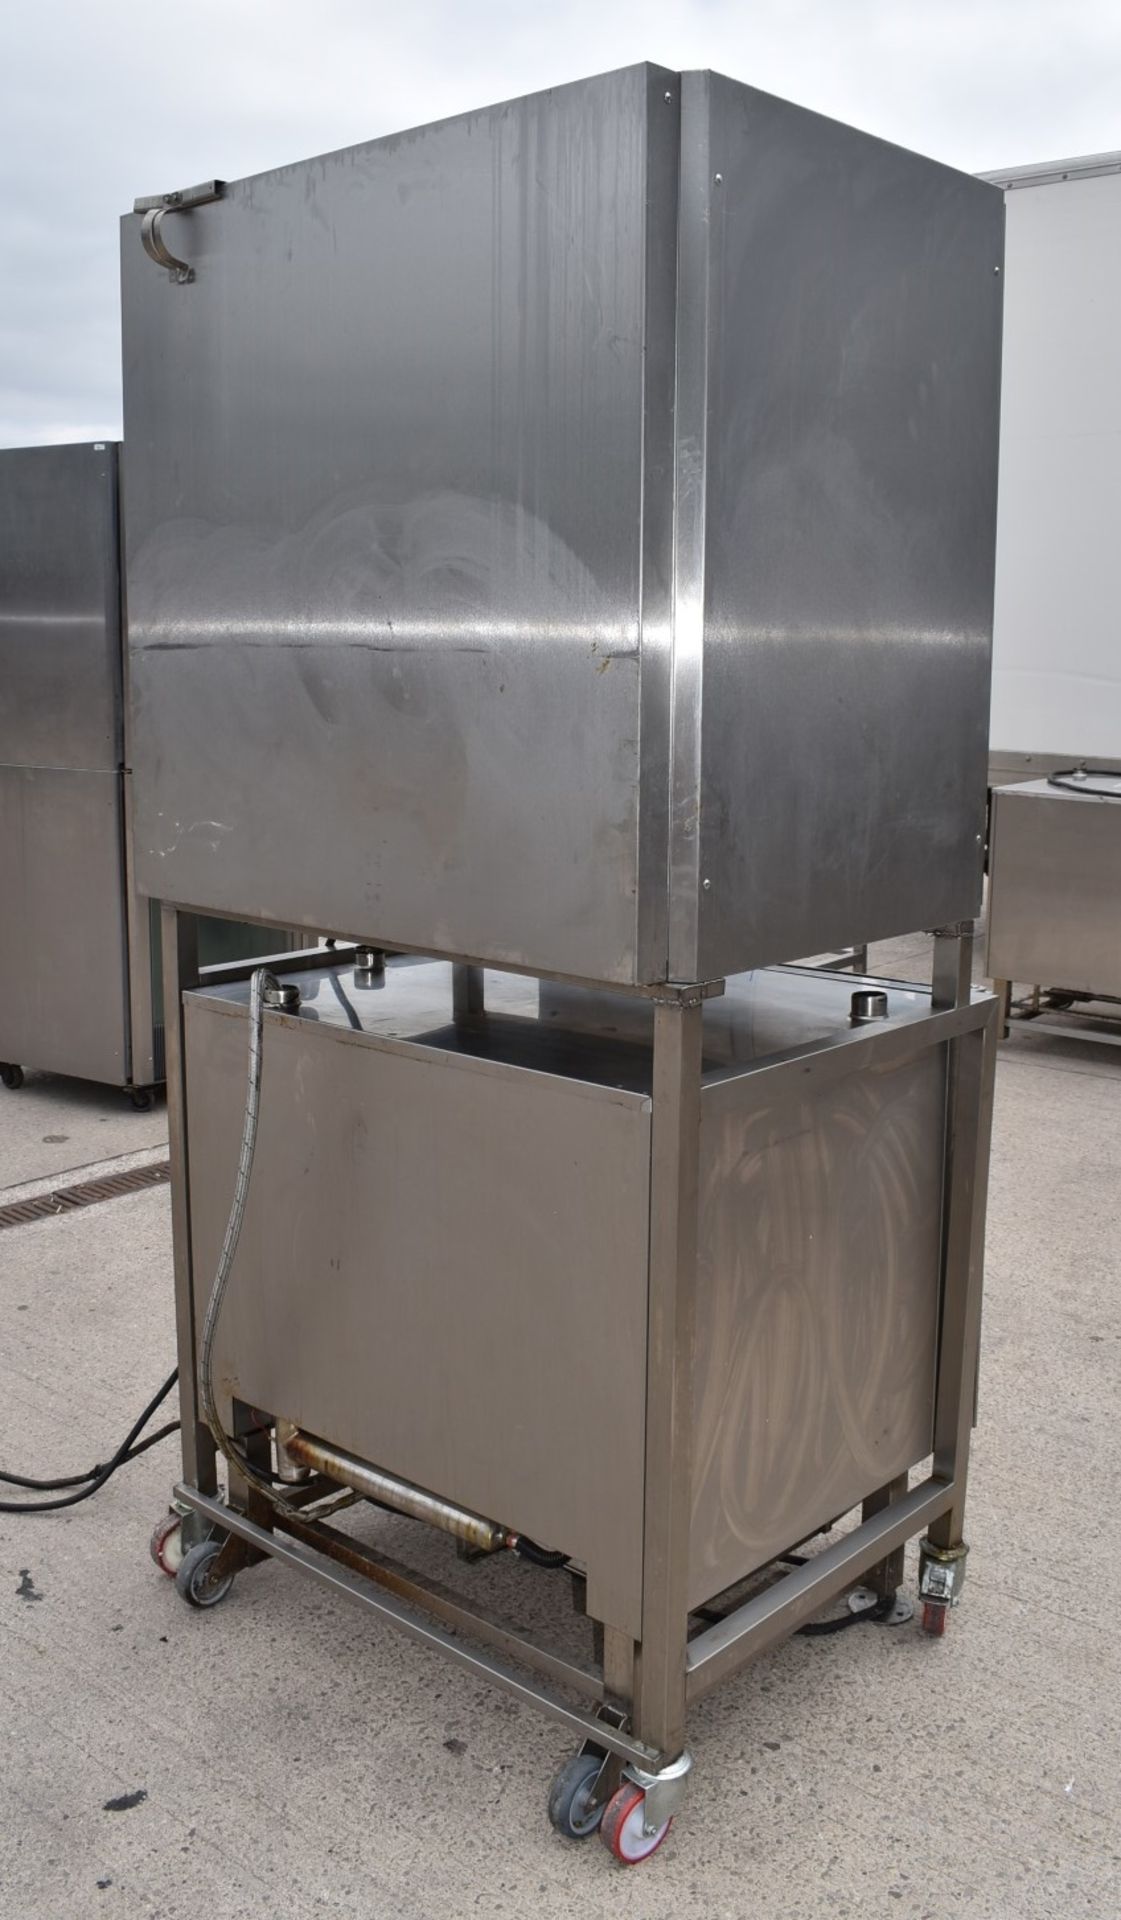 1 x Houno Electric Combi Oven and Fri-jado Rotisserie Oven Combo With Stand - 3 Phase - Image 9 of 22